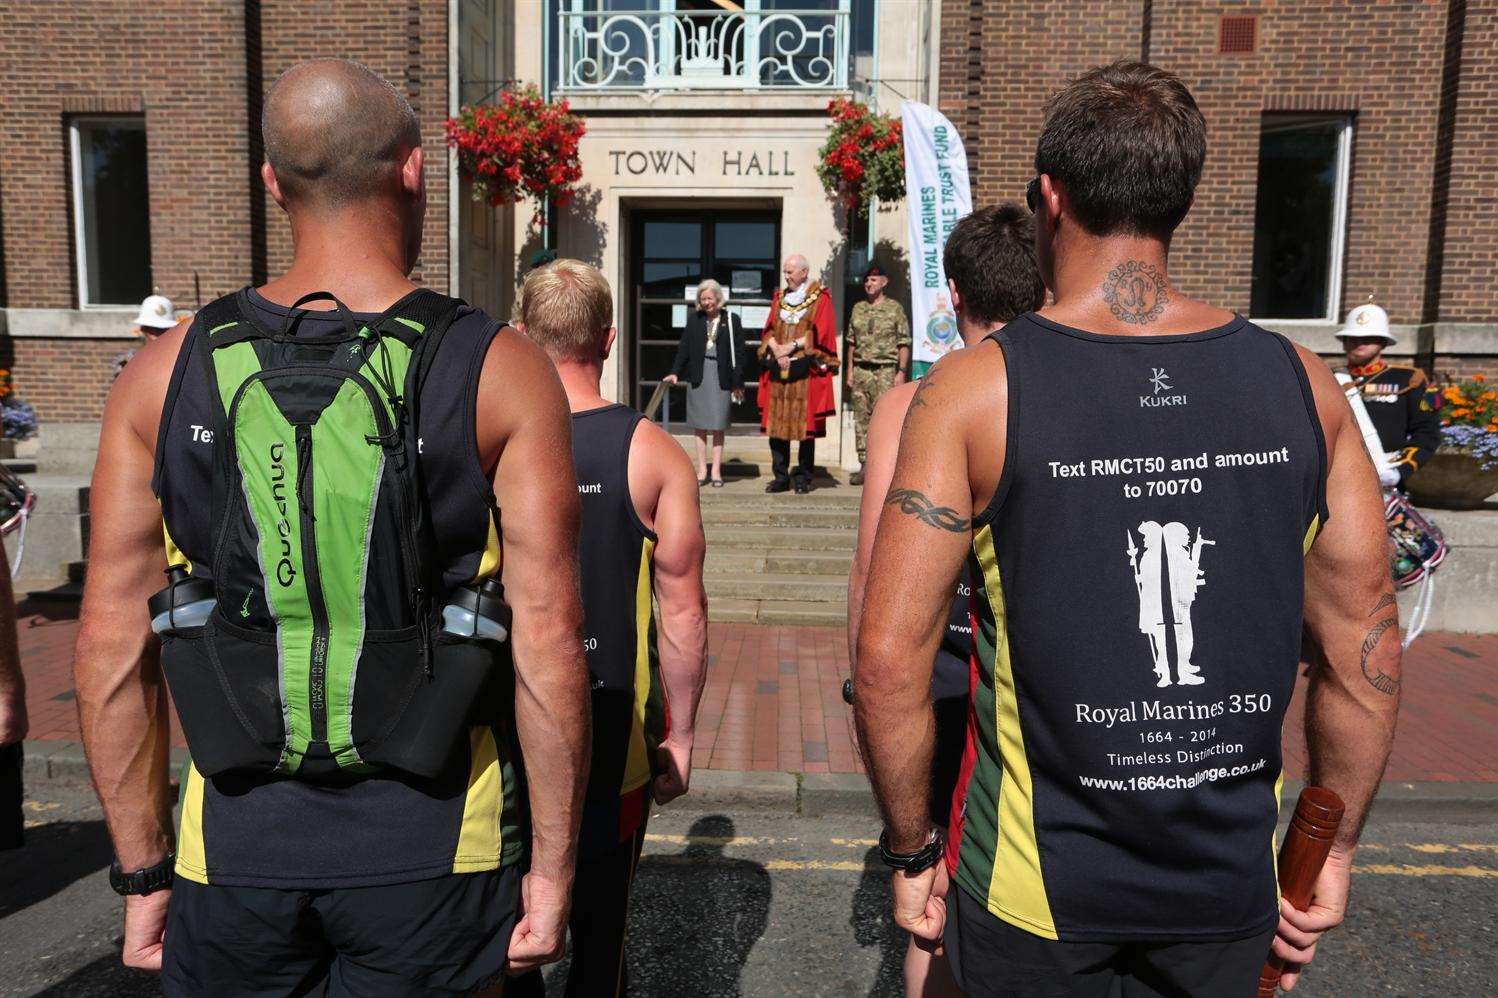 Her Majesty's Royal Marines are taking part in an incredible challenge celebrating the 350th anniversary of the force